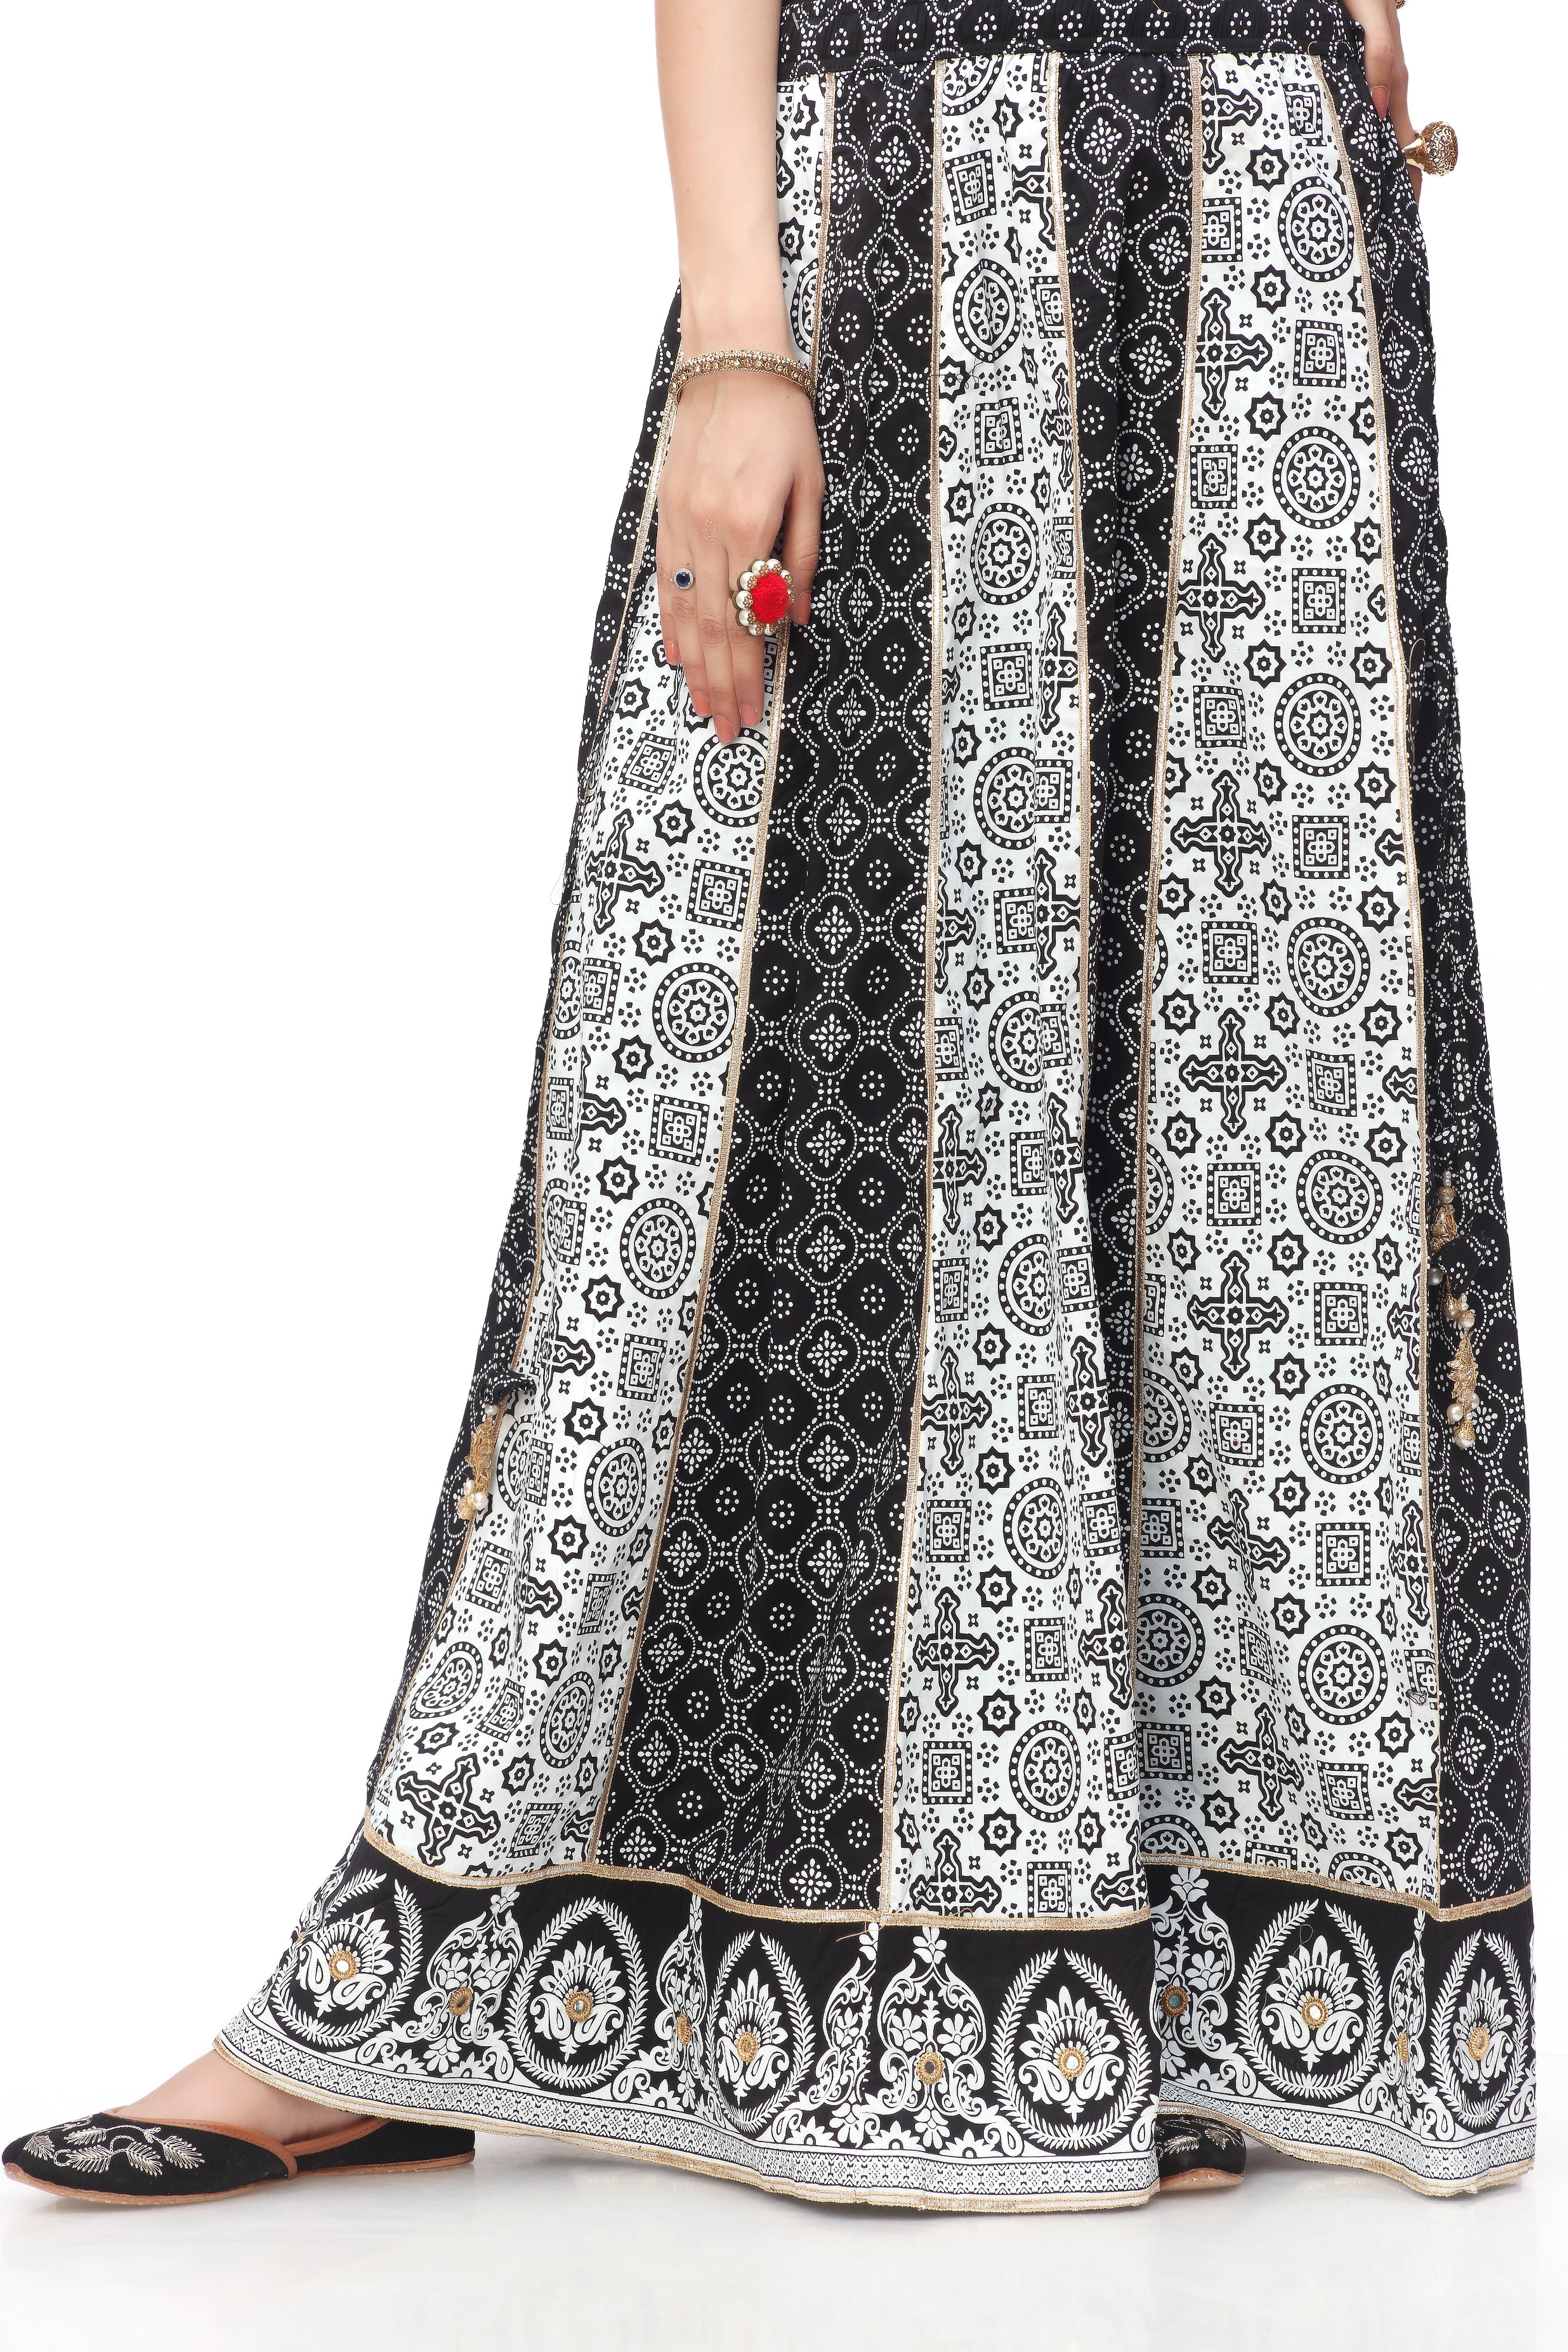 Monocrome Skirt in Black coloured Printed Cambric fabric 3